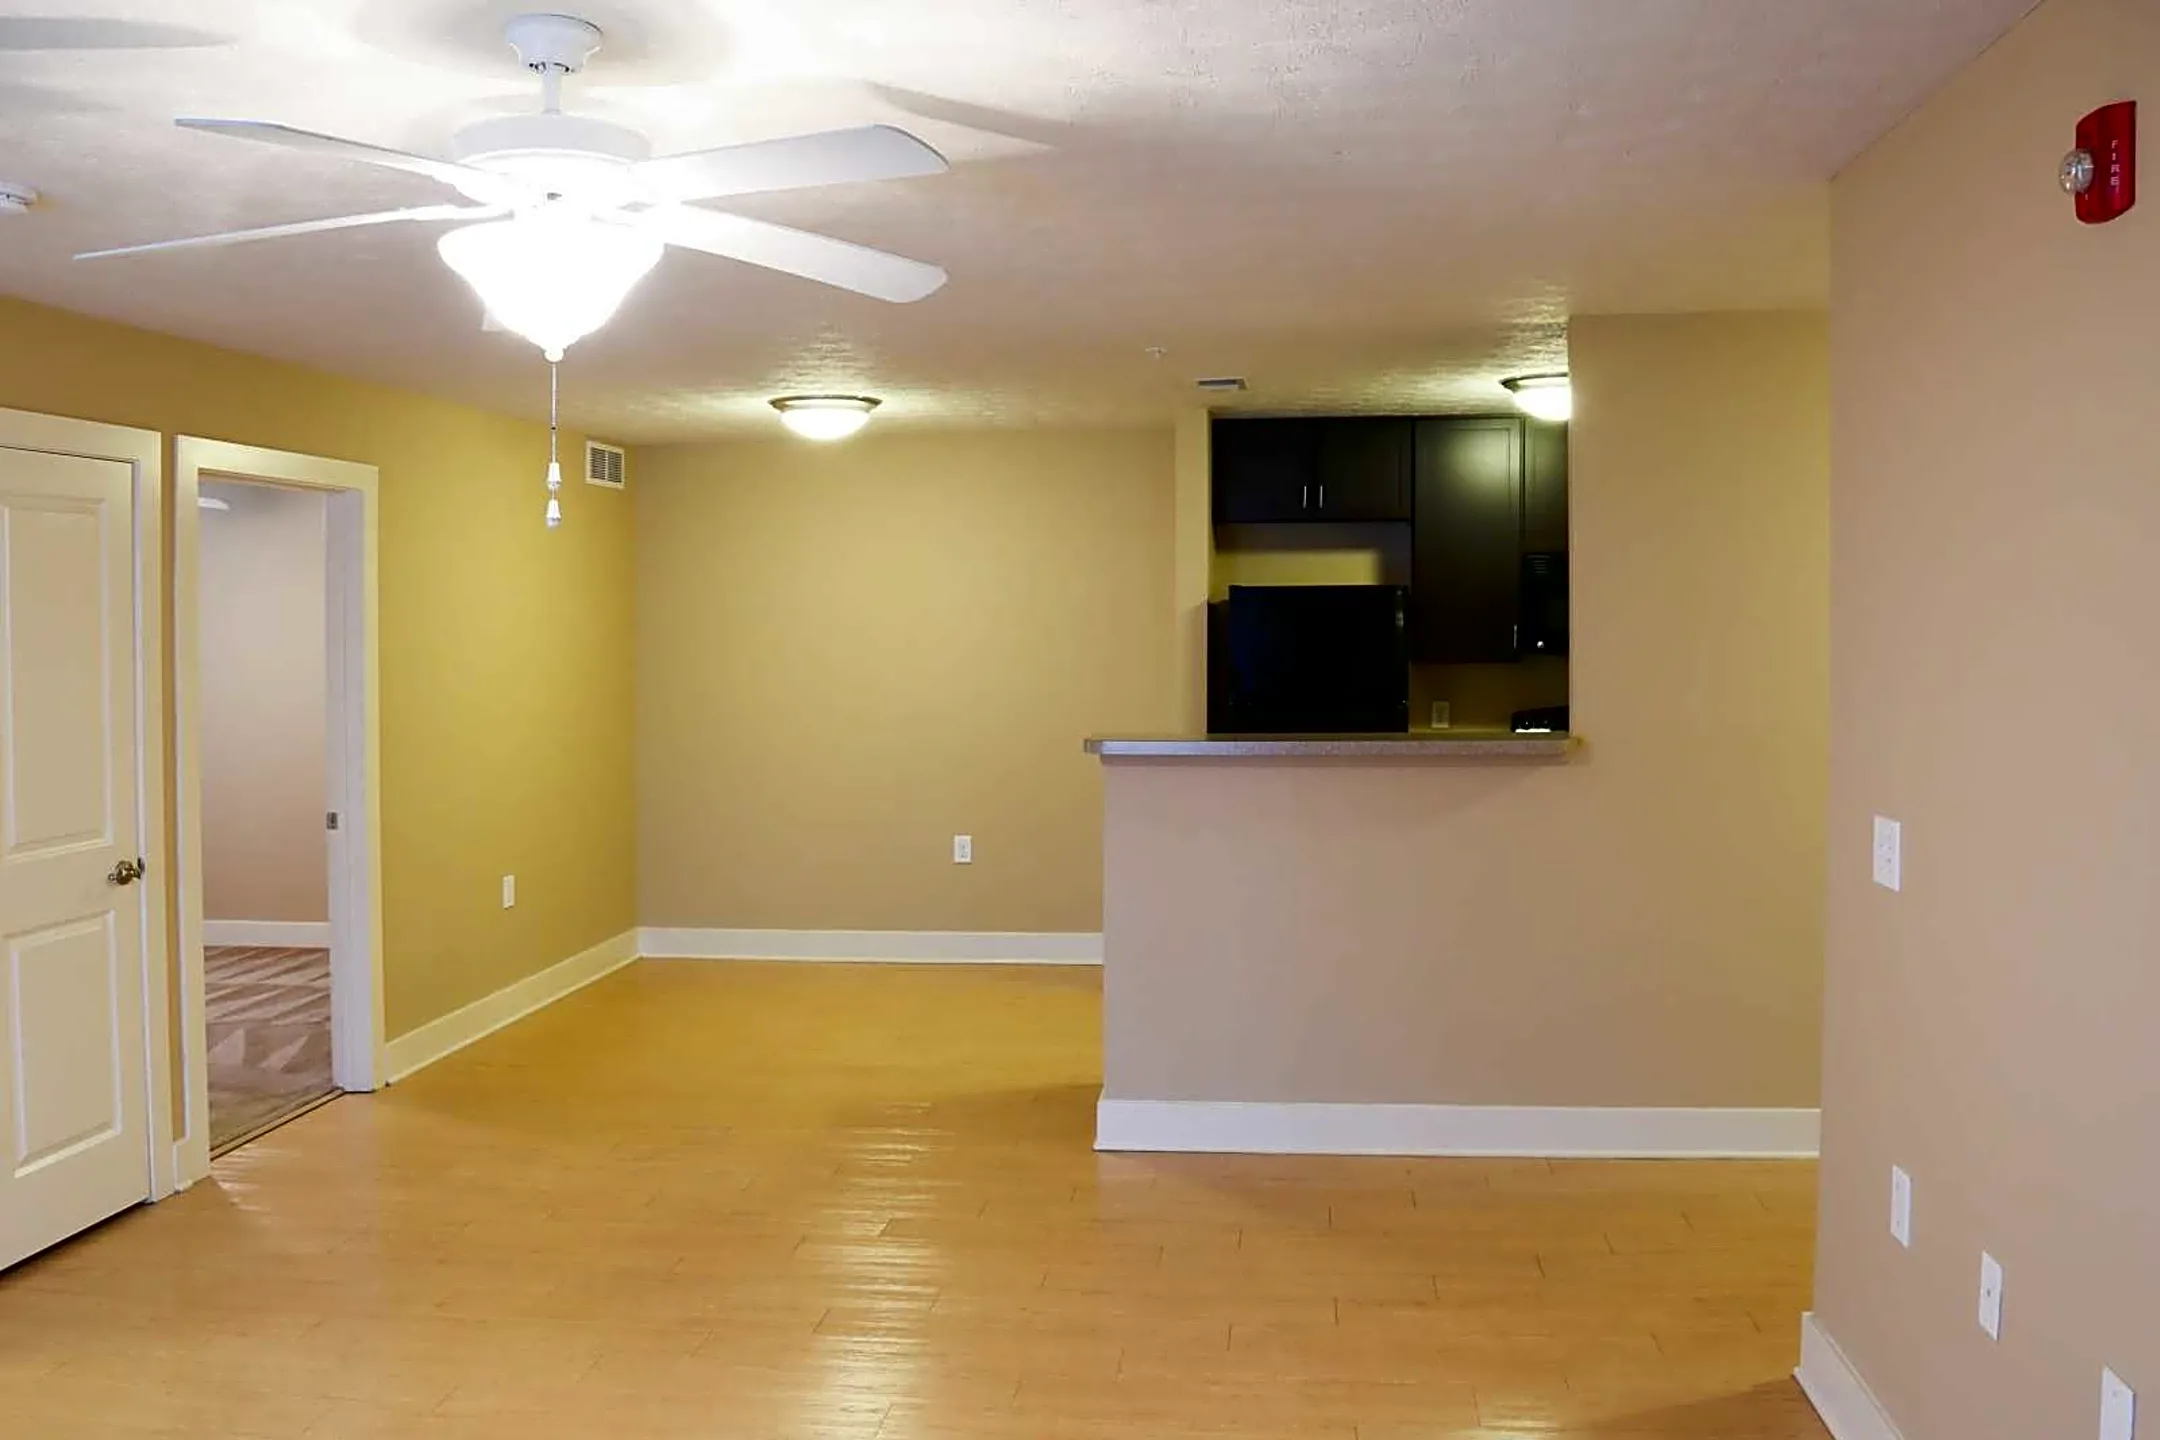 Living Room - Towne Commons Apartments - Elizabethtown, KY